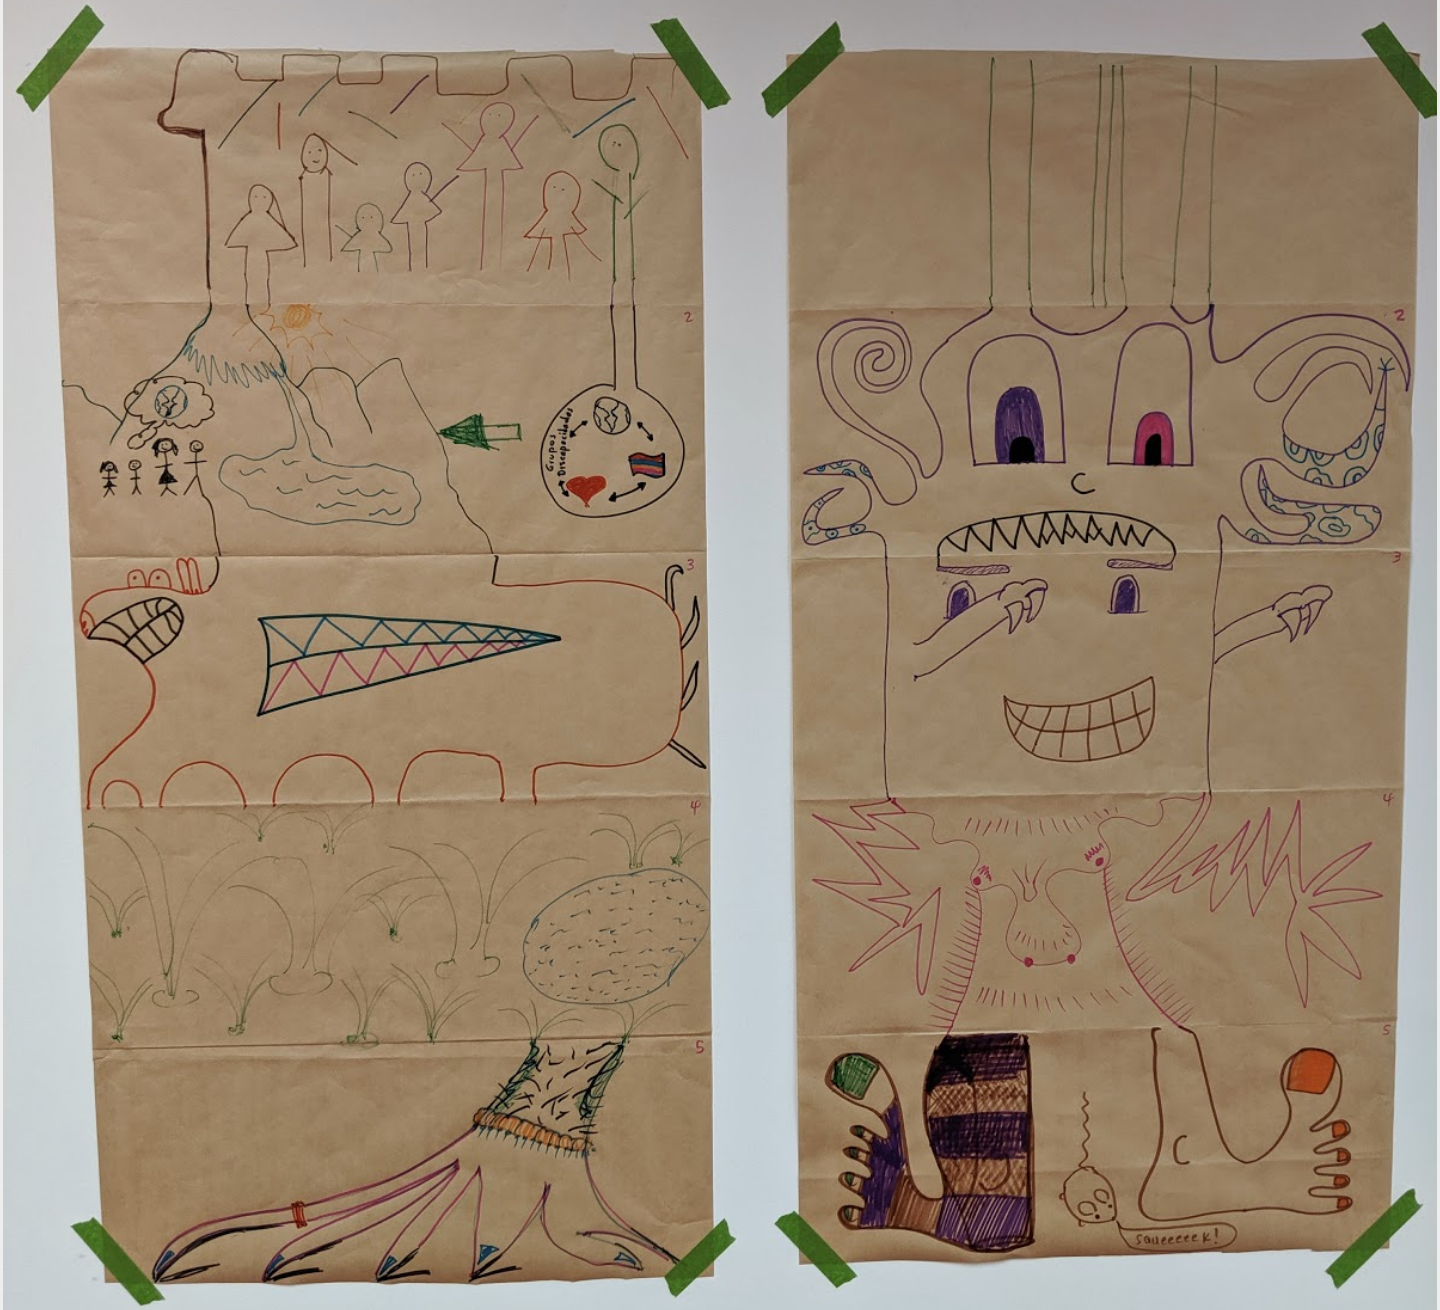 Collaborative surprise drawings by the SJRK team.